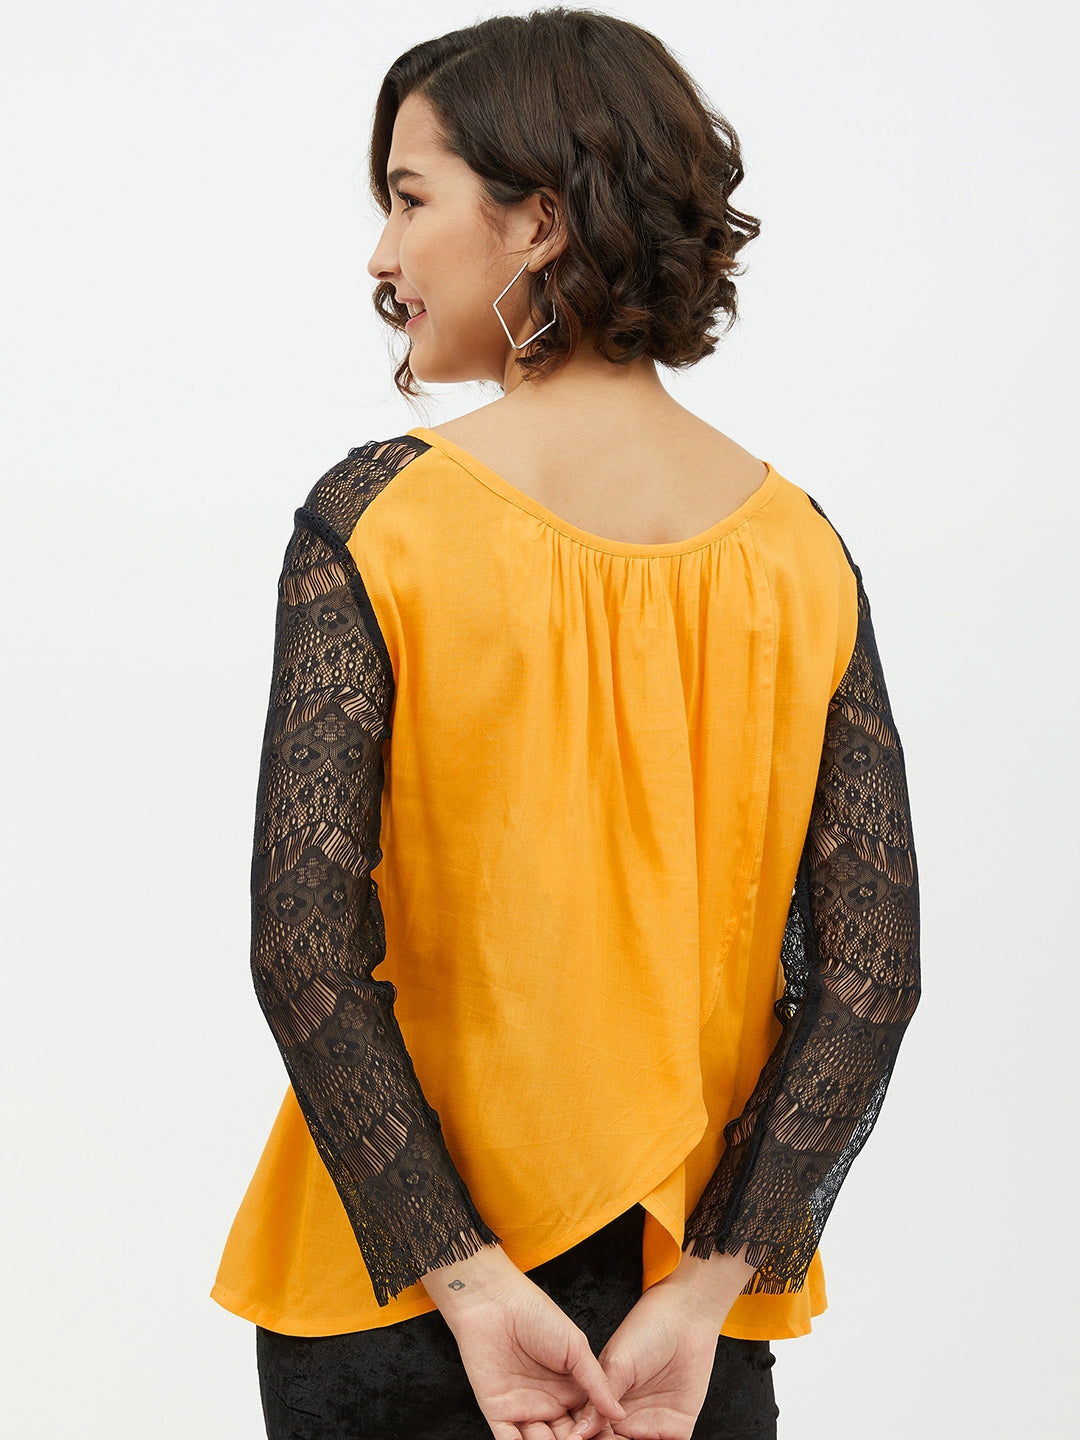 Women's Yellow Rayon Top with Lace Sleeve